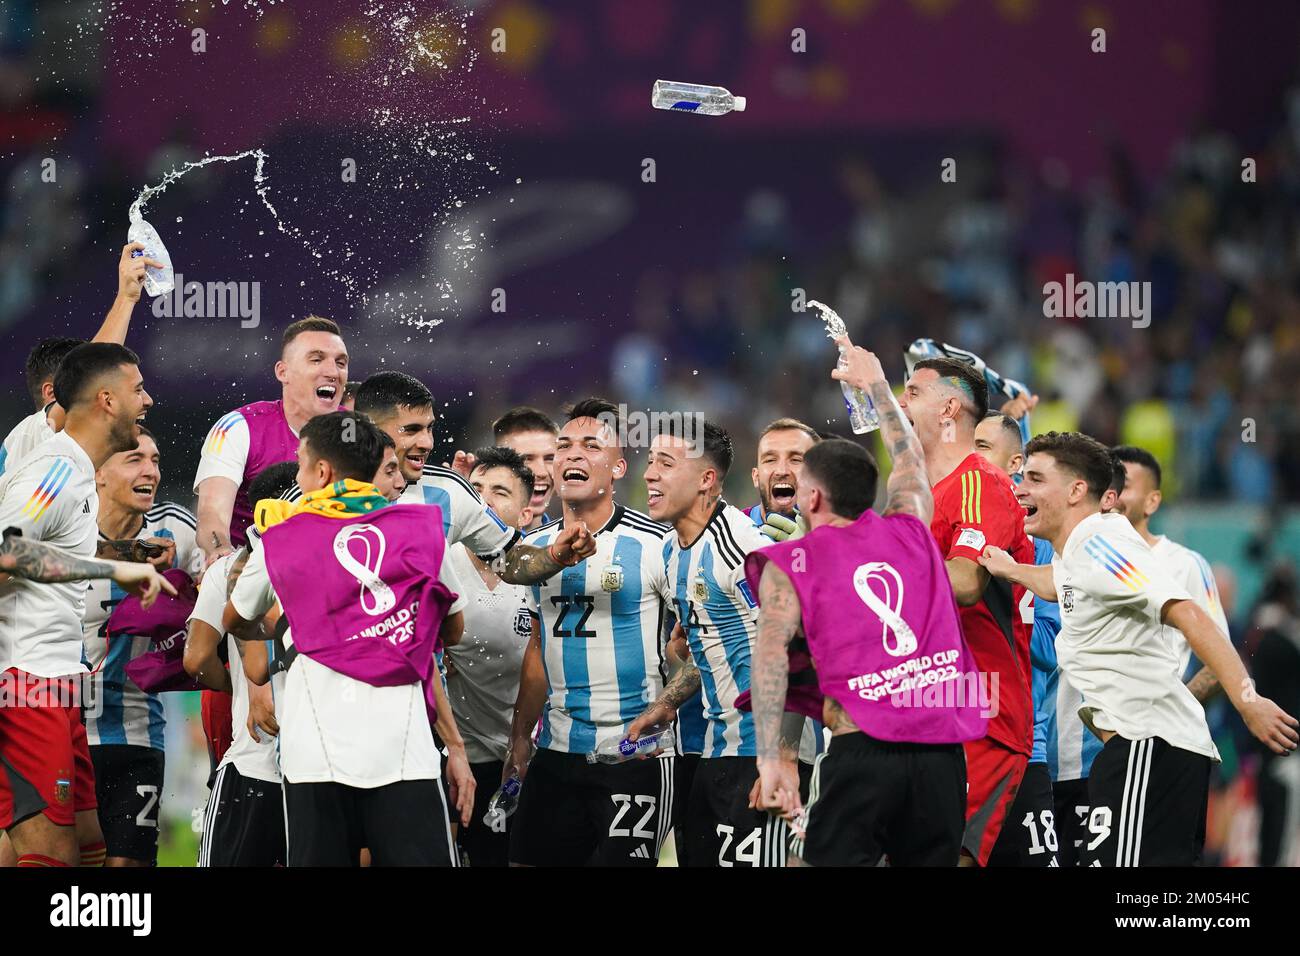 DOHA, QATAR - DECEMBER 3: Players of Argentina celebrate the victory during the FIFA World Cup Qatar 2022 Round of 16 match between Argentina and Australia at Ahmad bin Ali Stadium on December 3, 2022 in Al Rayyan, Qatar. (Photo by Florencia Tan Jun/PxImages) Stock Photo